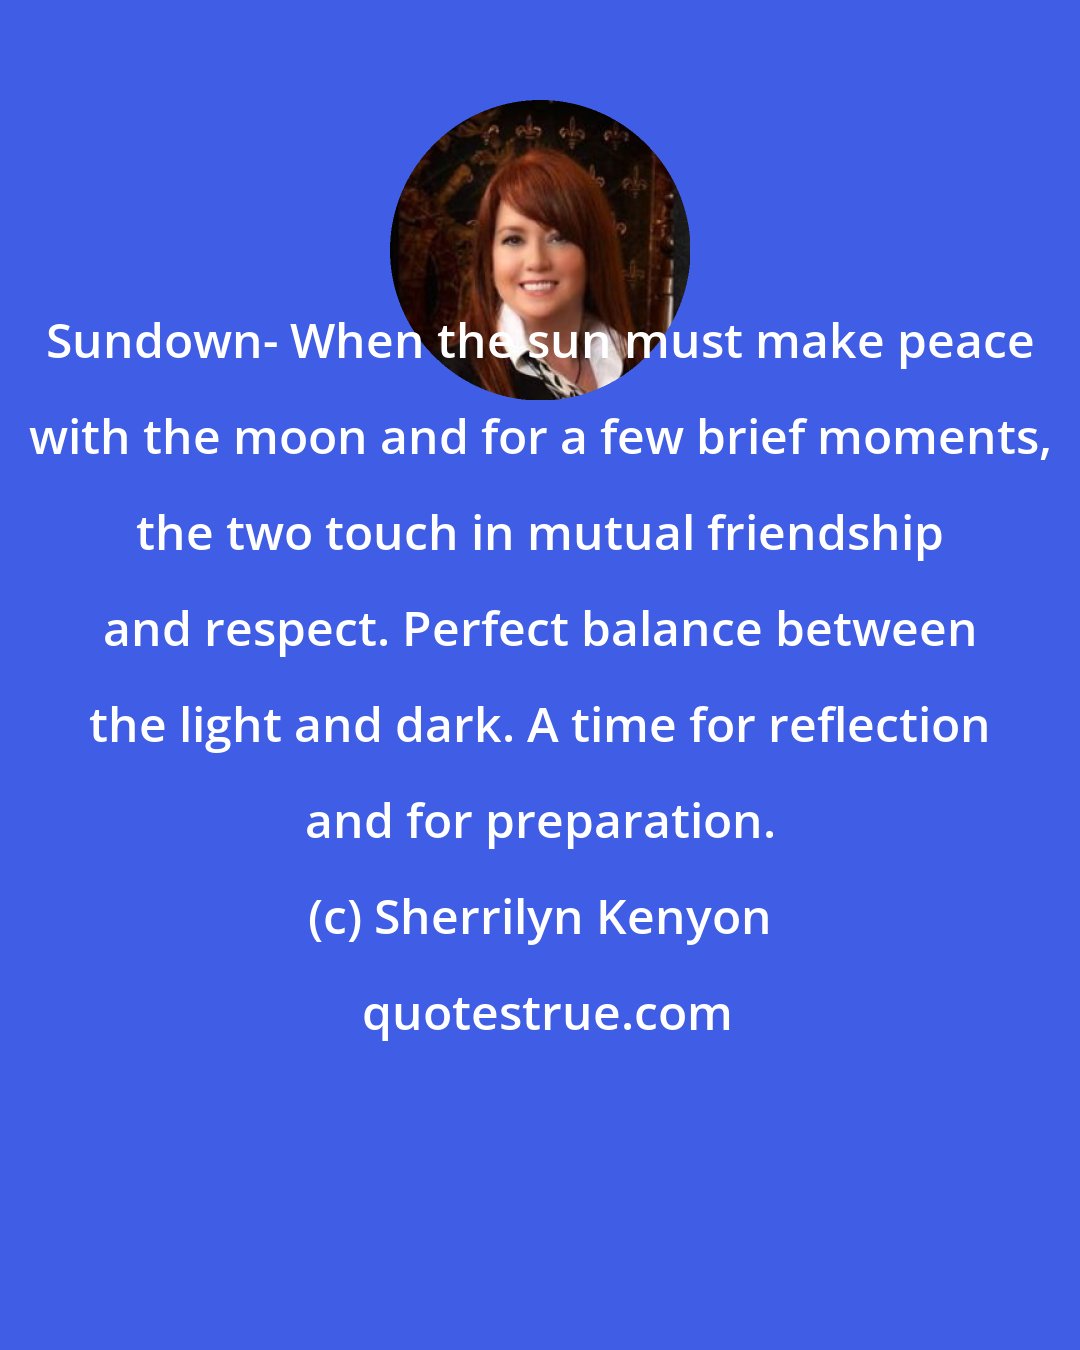 Sherrilyn Kenyon: Sundown- When the sun must make peace with the moon and for a few brief moments, the two touch in mutual friendship and respect. Perfect balance between the light and dark. A time for reflection and for preparation.